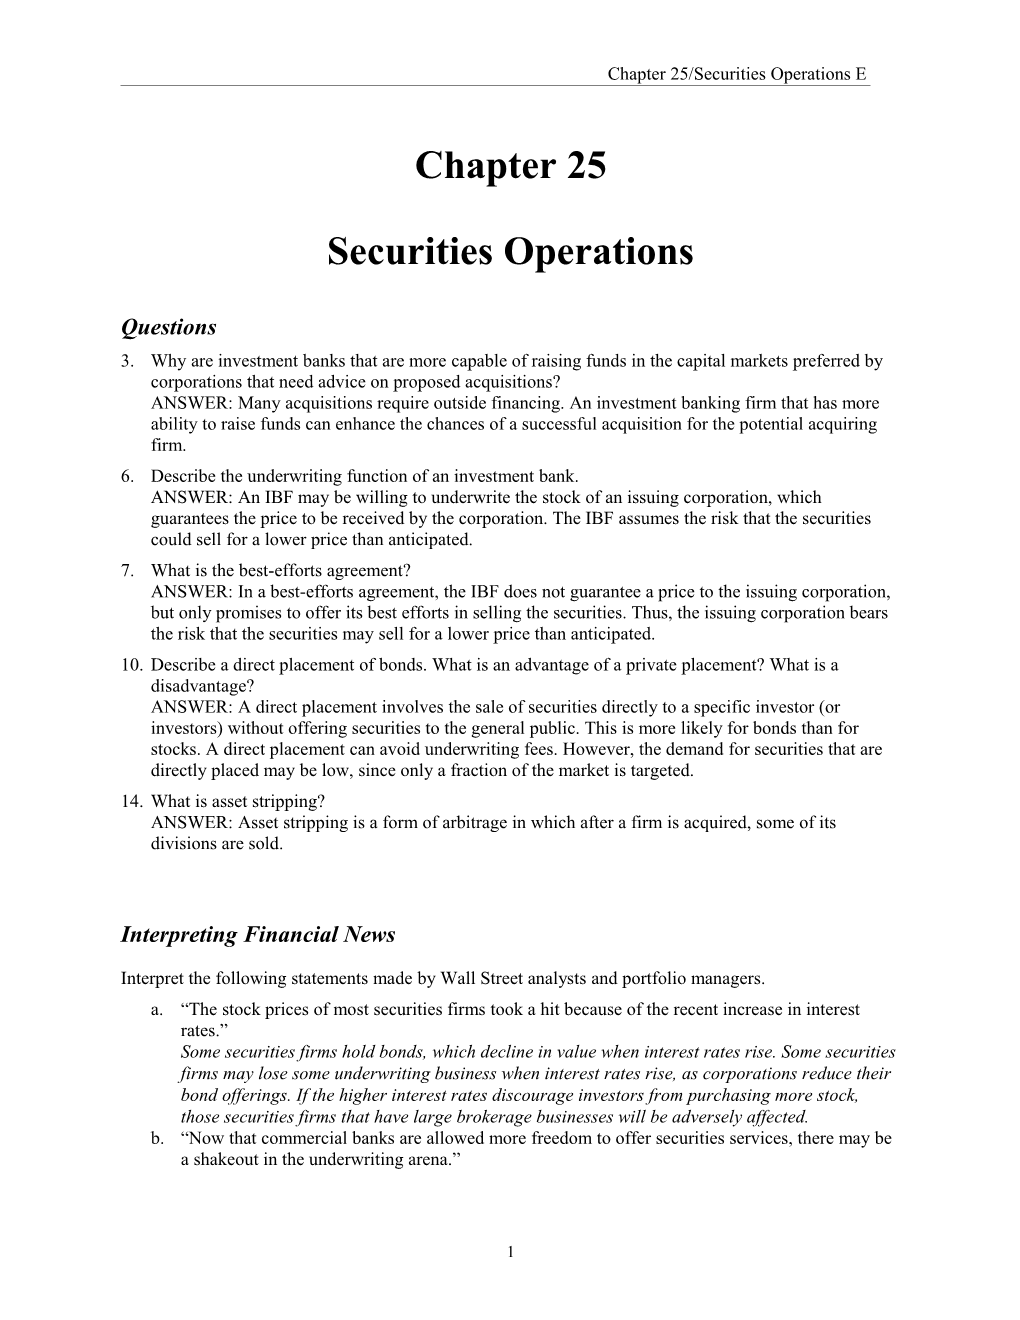 Securities Operations